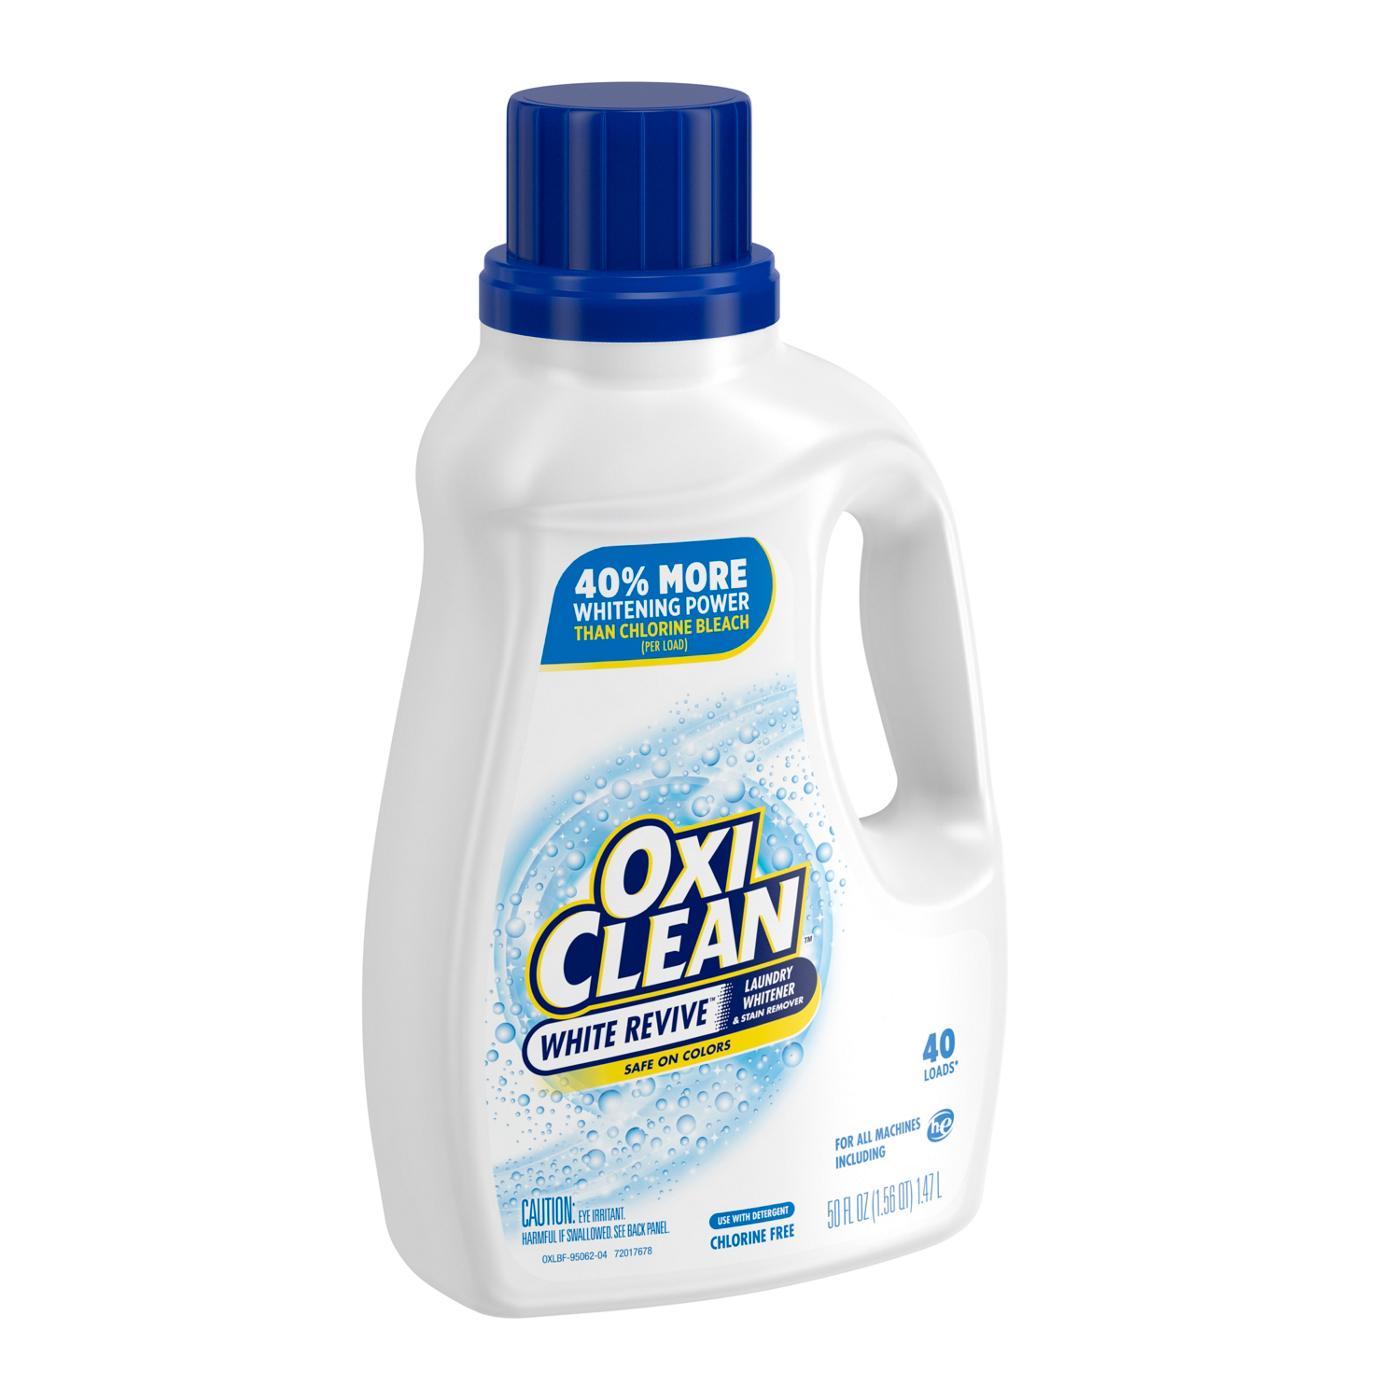 OxiClean White Revive HE Laundry Whitener & Stain Remover 40 Loads; image 2 of 2